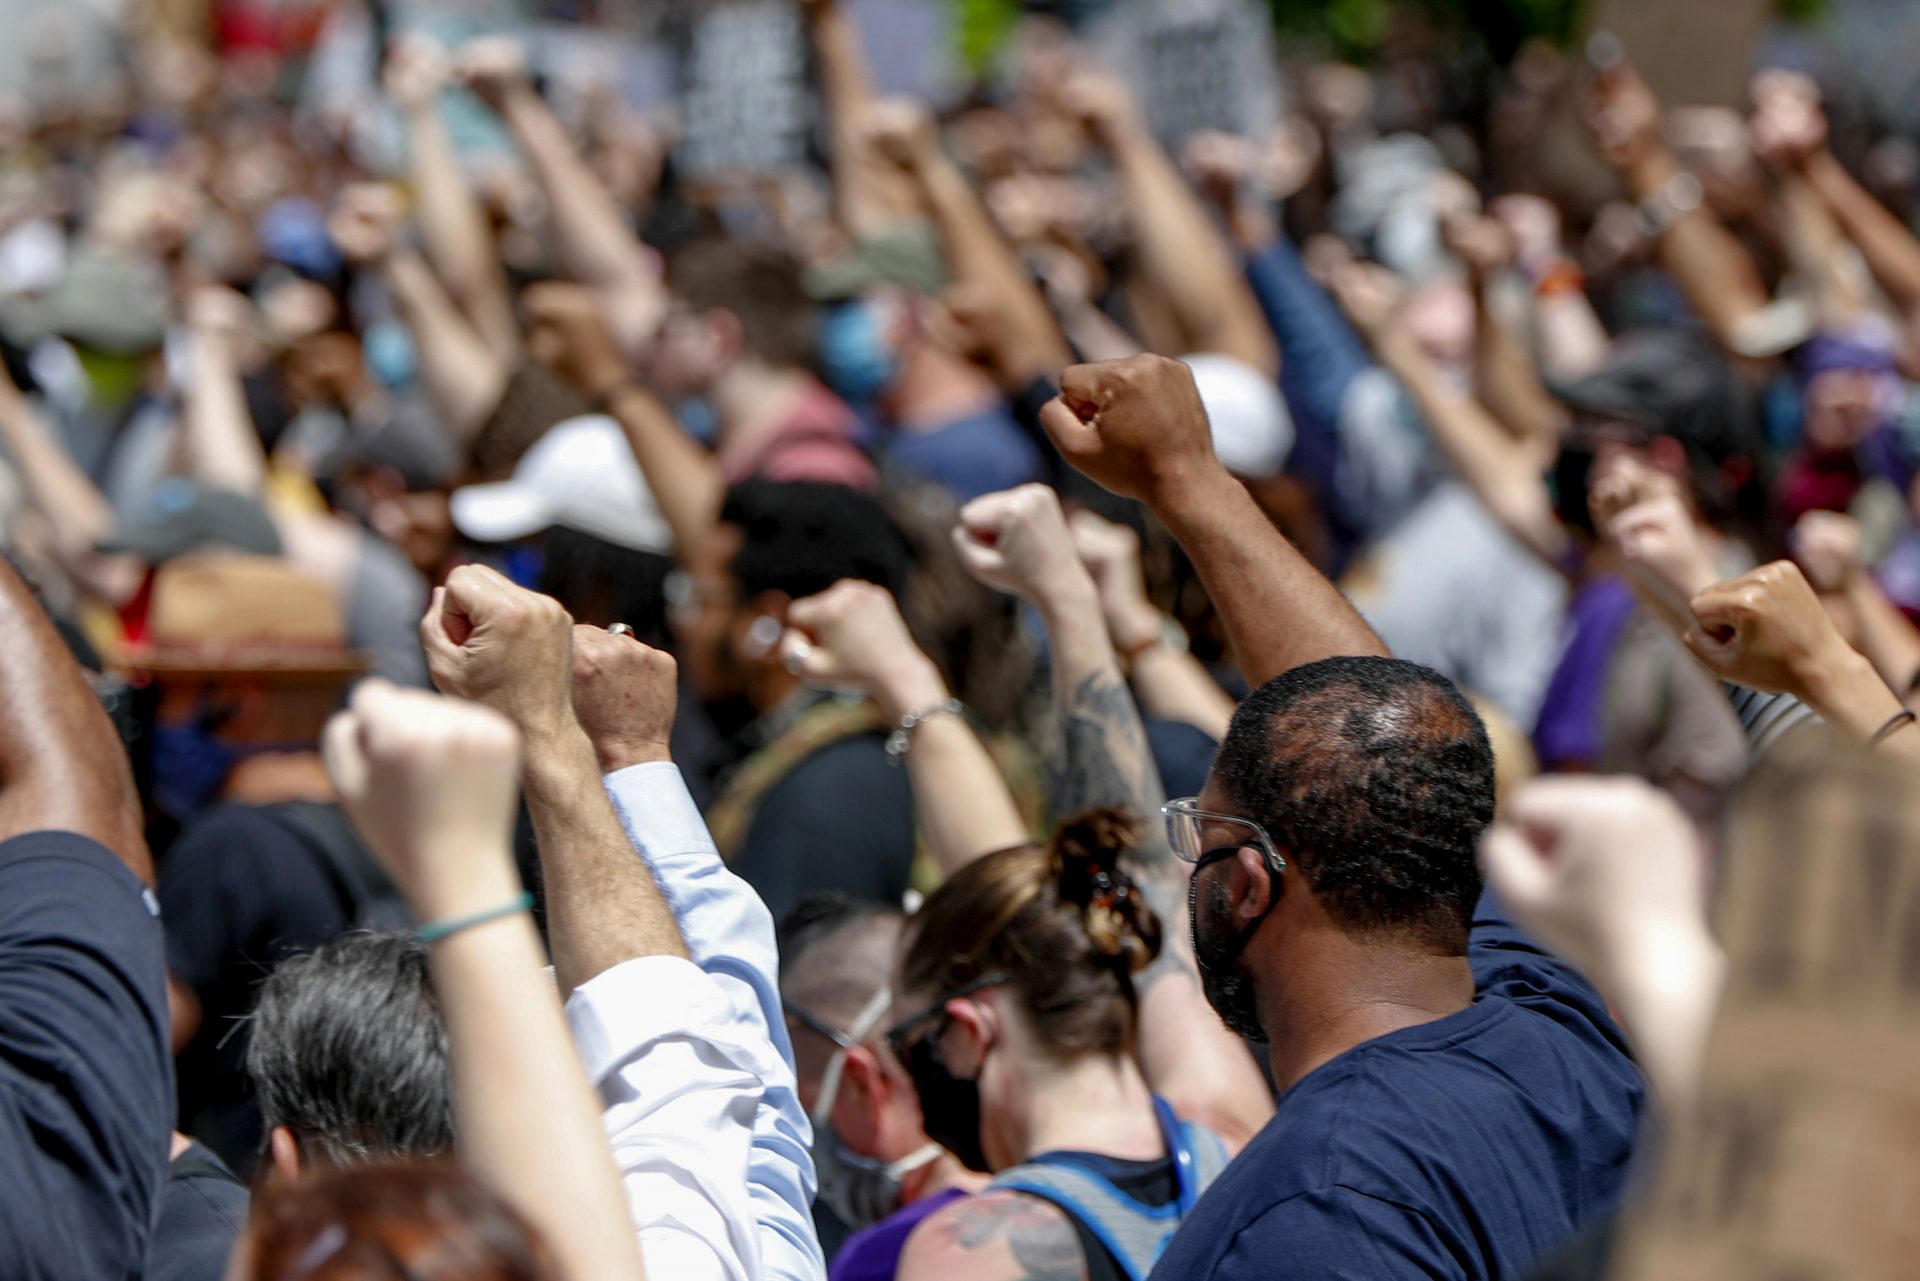 FILE - In this Saturday, May 30, 2020, file photo, demonstrators raise fists in the air during a march in Pittsburgh to protest the death of George Floyd, who died after being restrained by Minneapolis police officers on May 25.